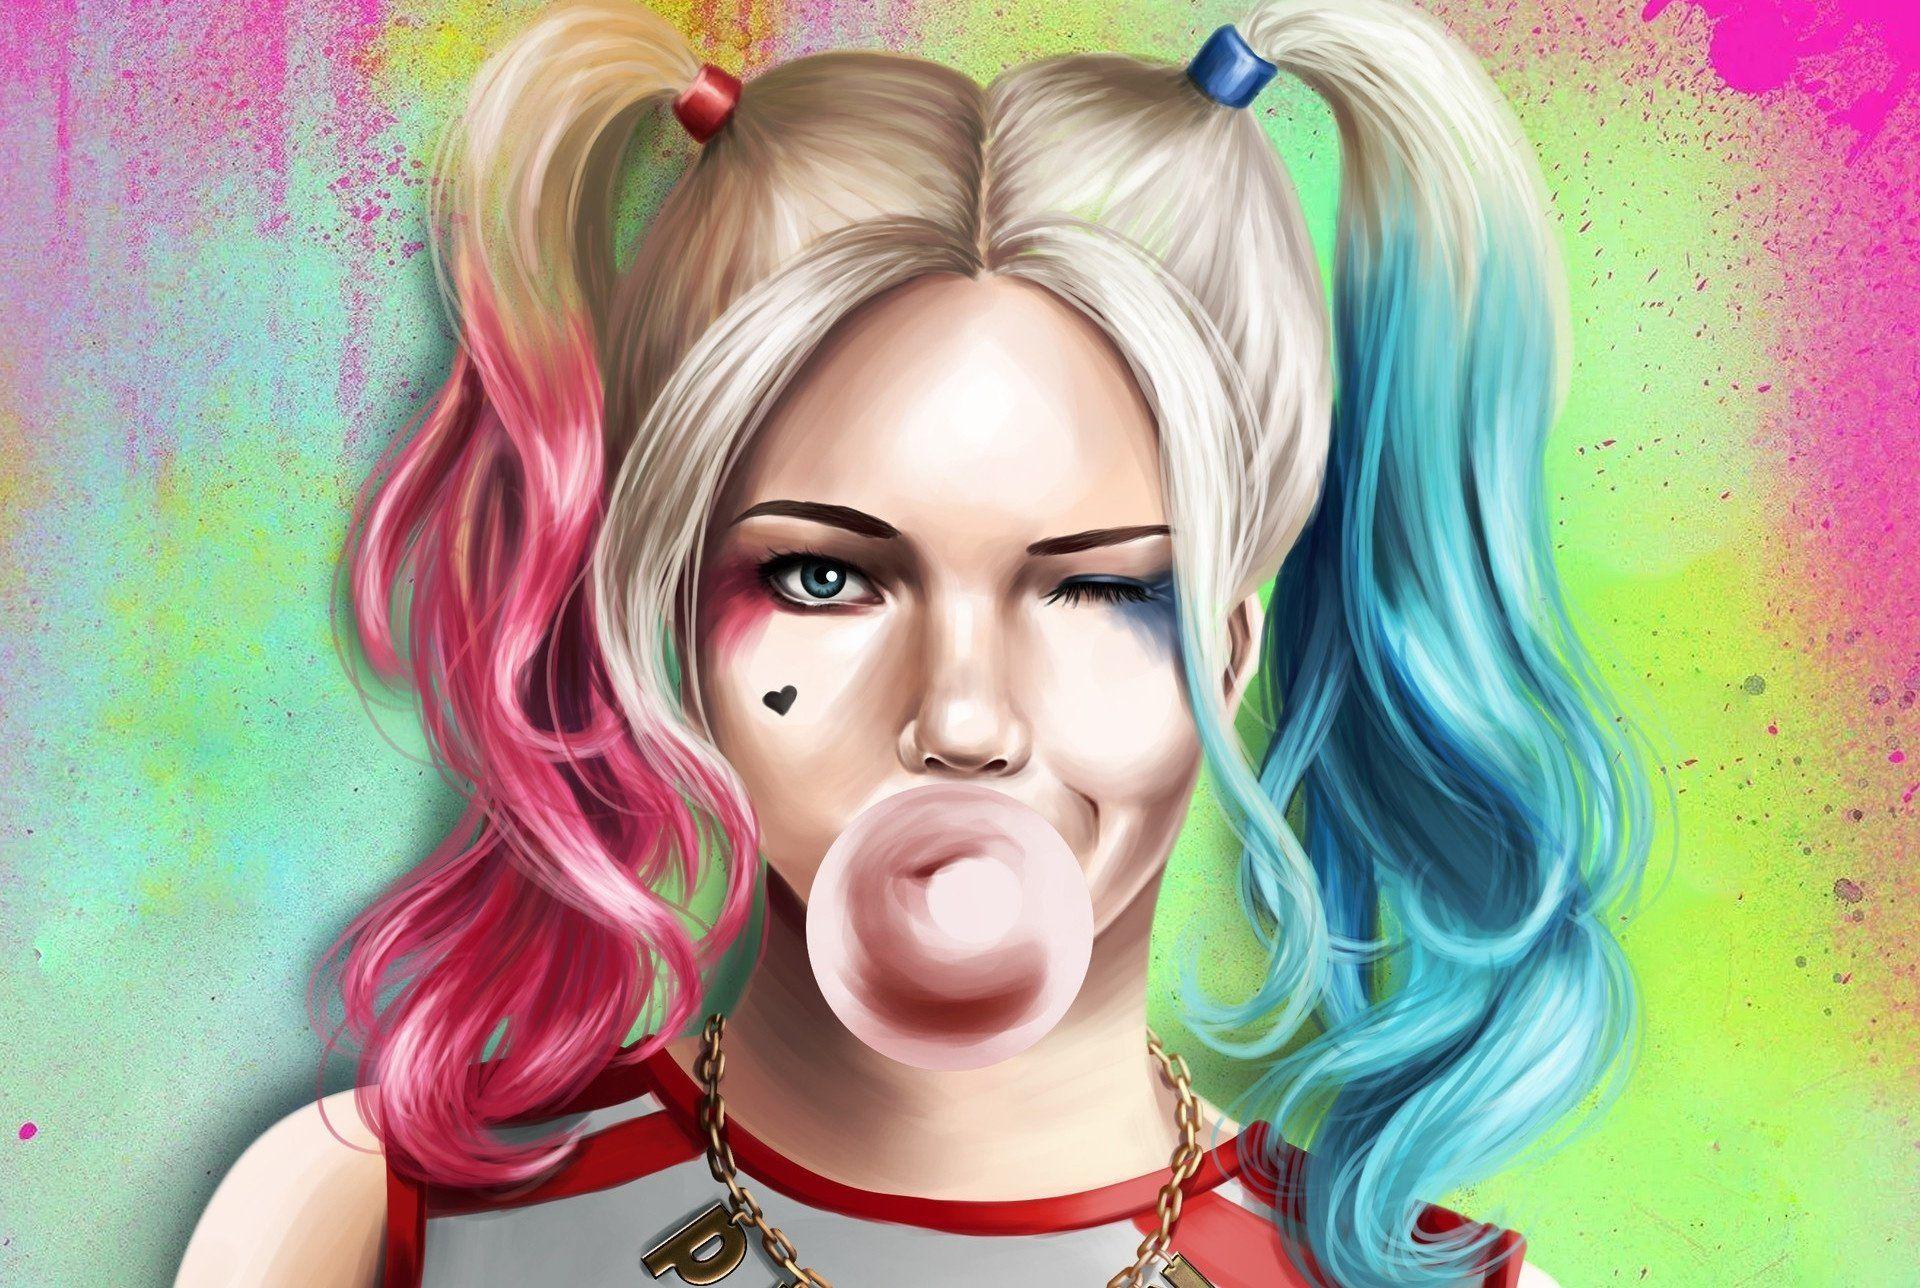 Download】Harley Quinn Best High Quality Image & Wallpaper 2018